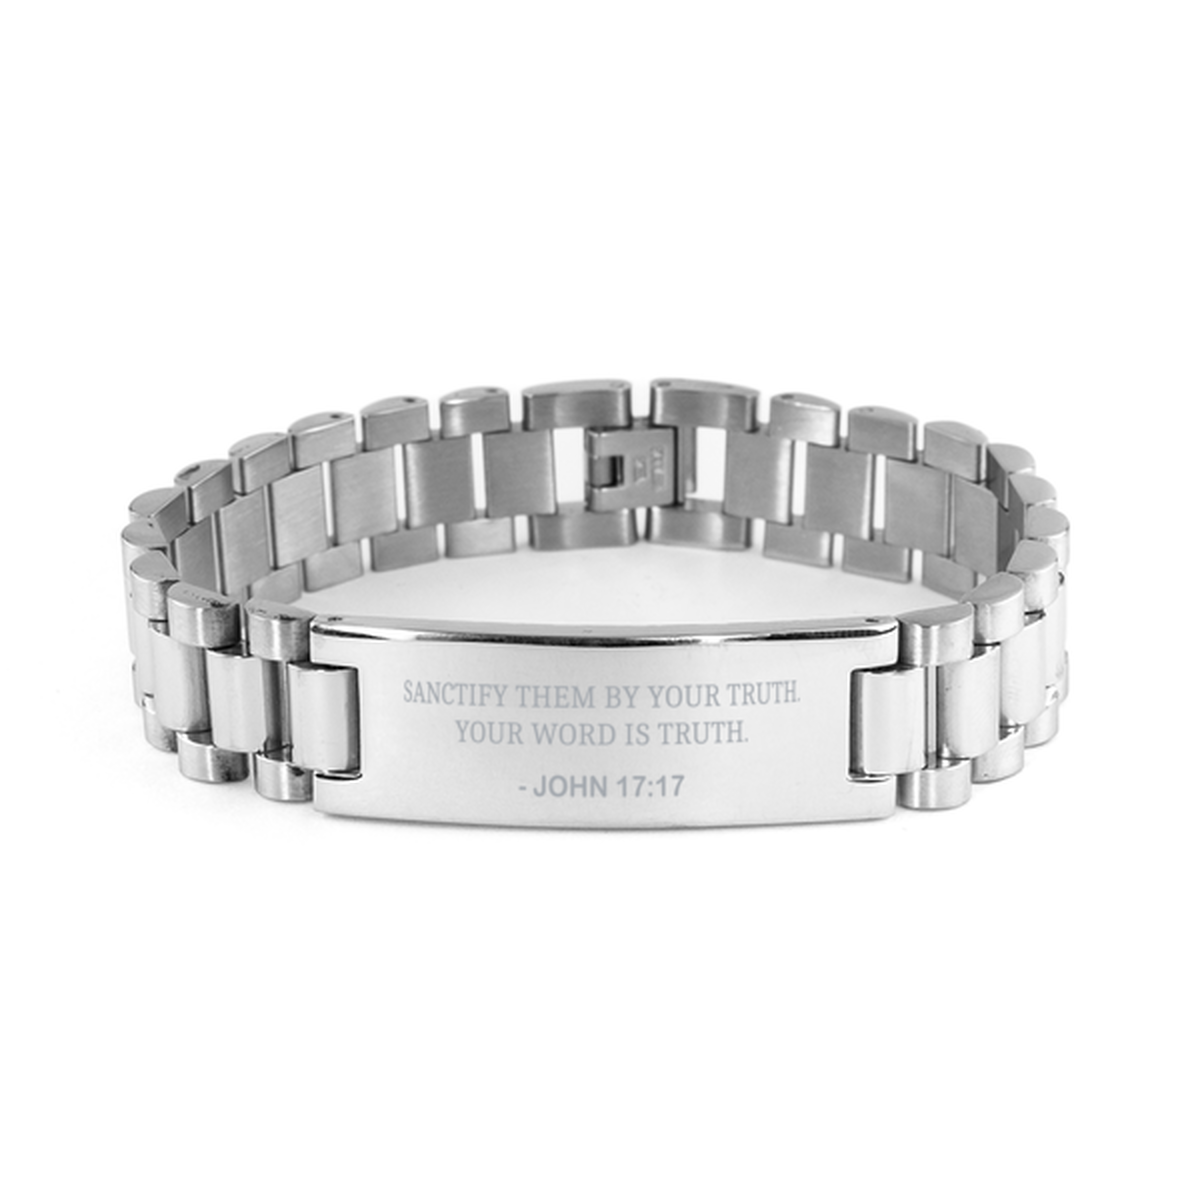 Christian Ladder Stainless Steel Bracelet, John 17:17 Sanctify Them By Your Truth. Your Word Is, Motivational Bible Verse Gifts For Men Women